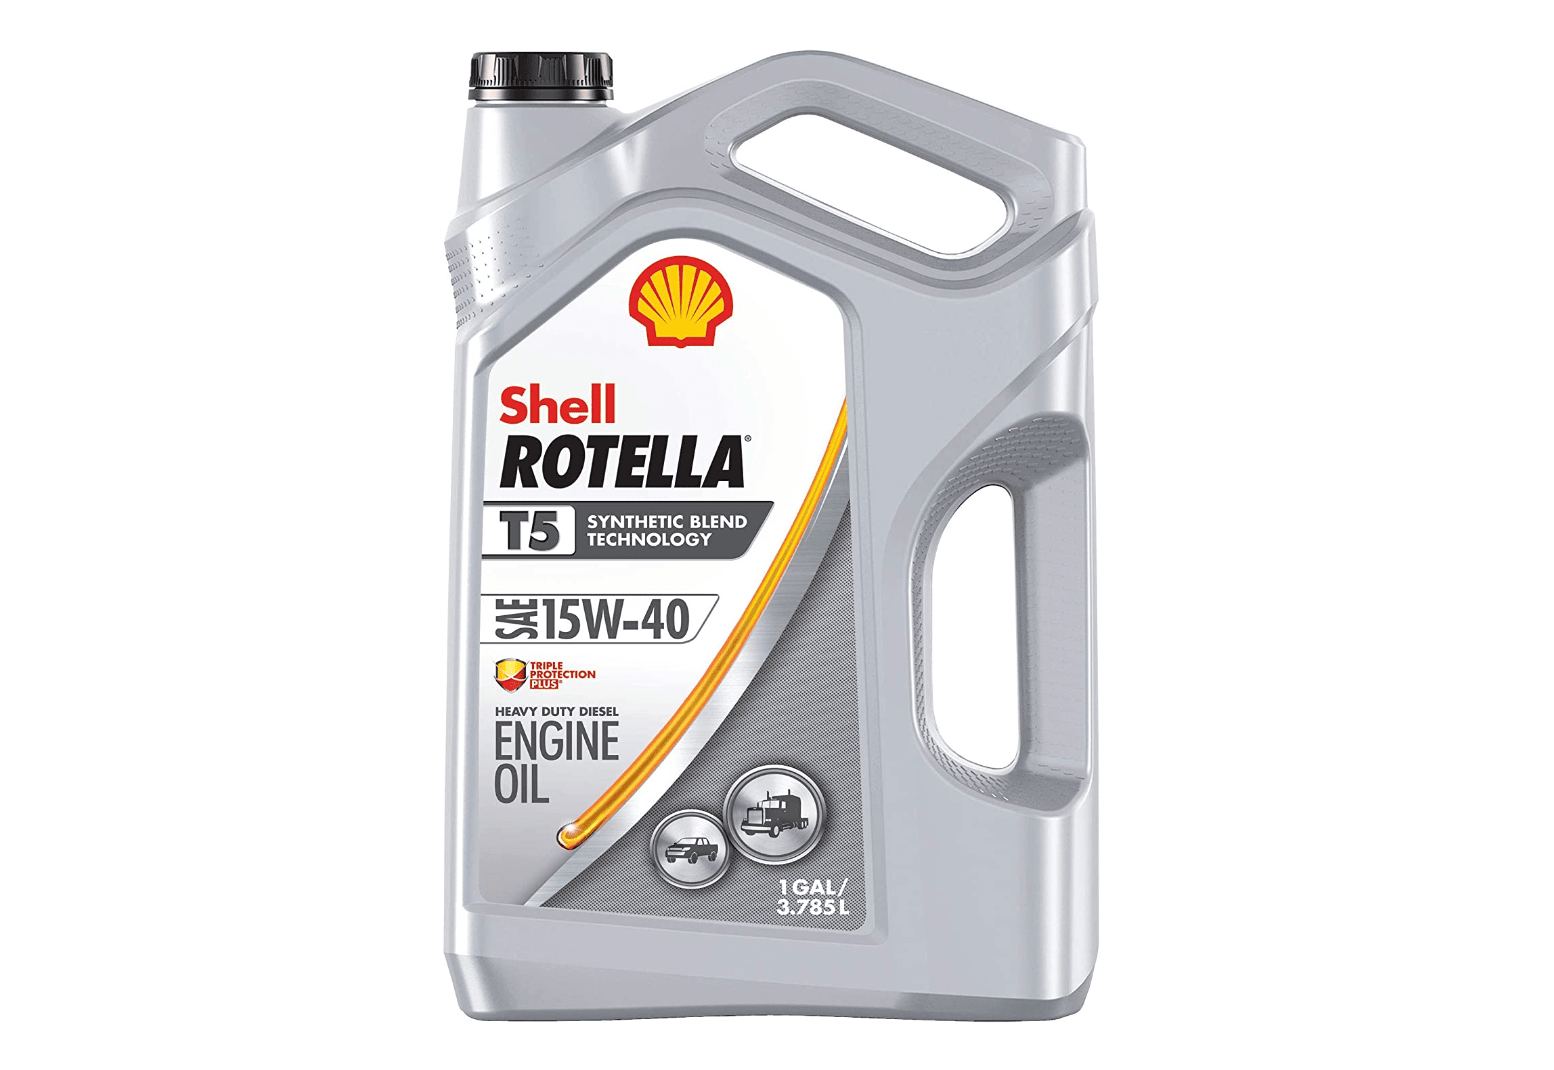 Shell Rotella T5 Synthetic Blend Diesel Engine Oil